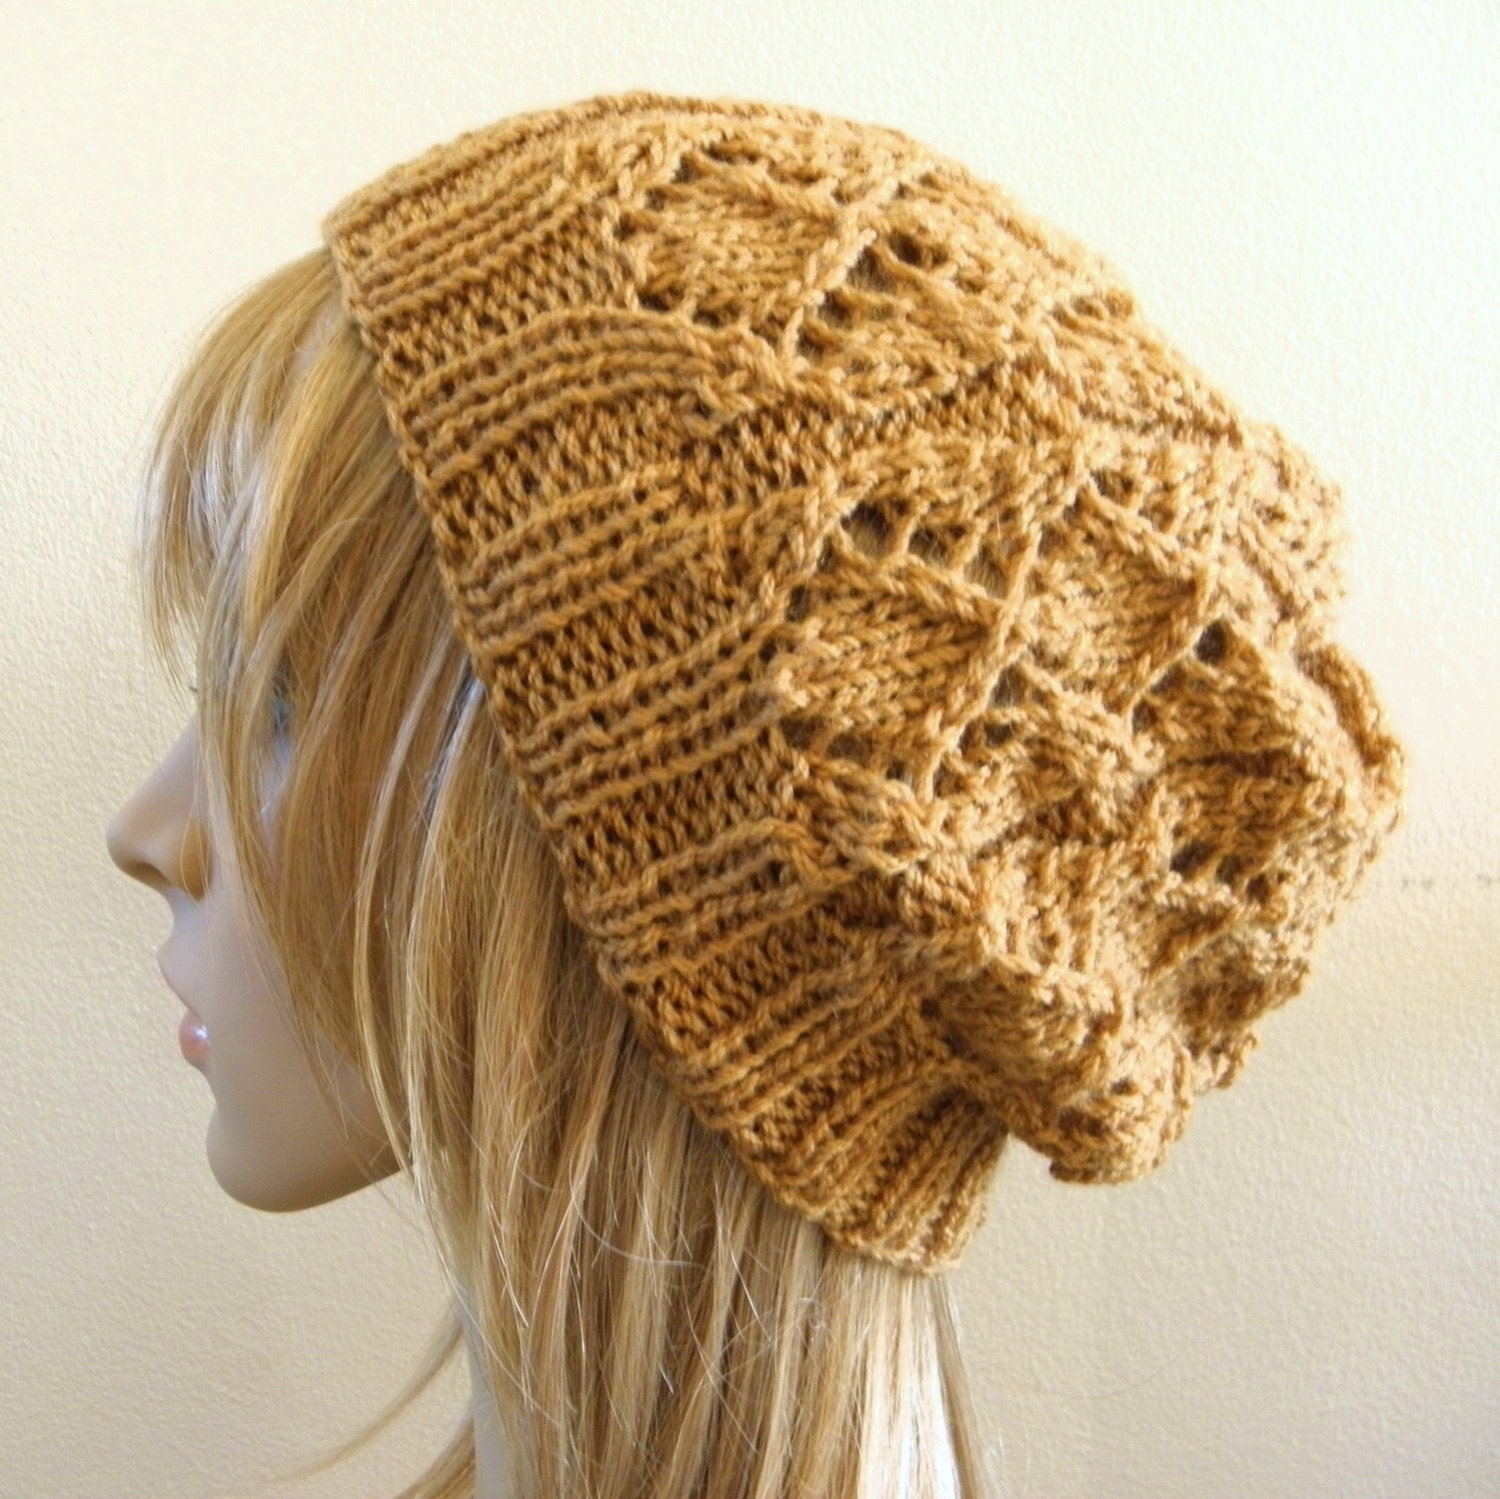 Lacy beret slouchy hat in caramel toffee camel brown wool hand knit